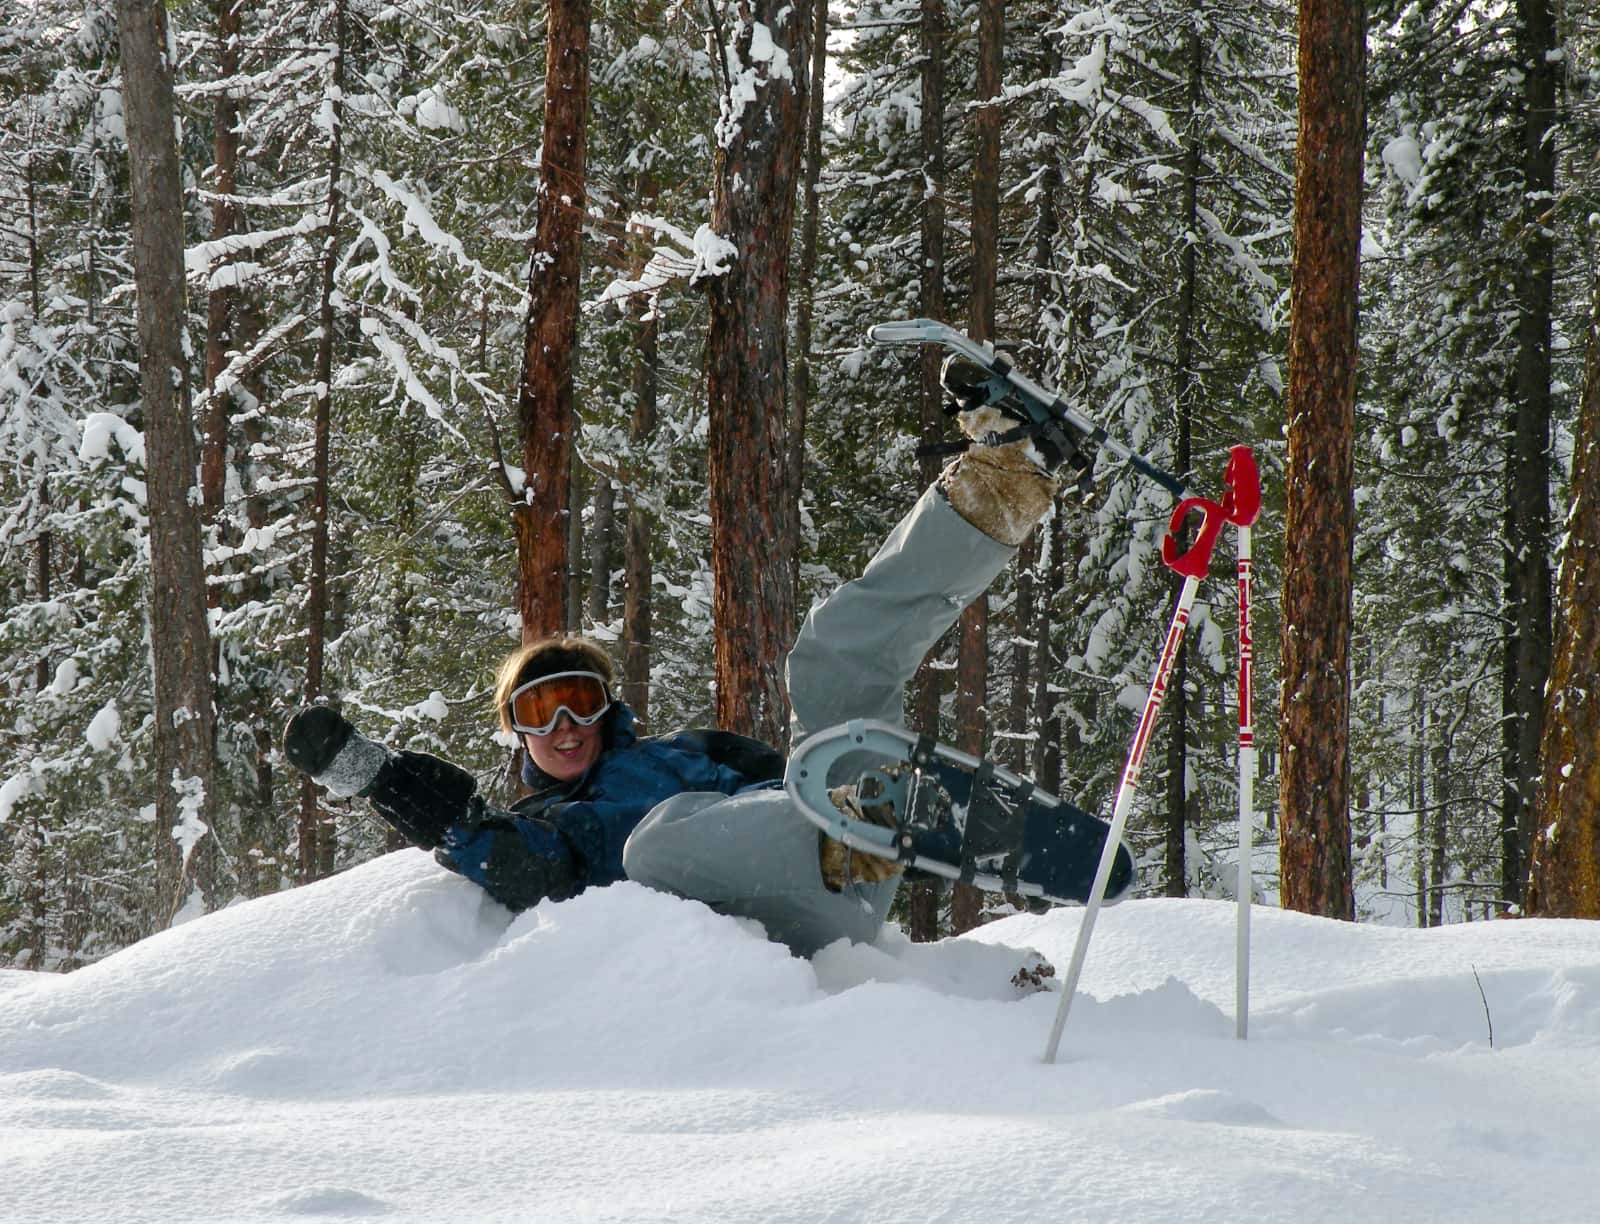 Skier laying in deep snow